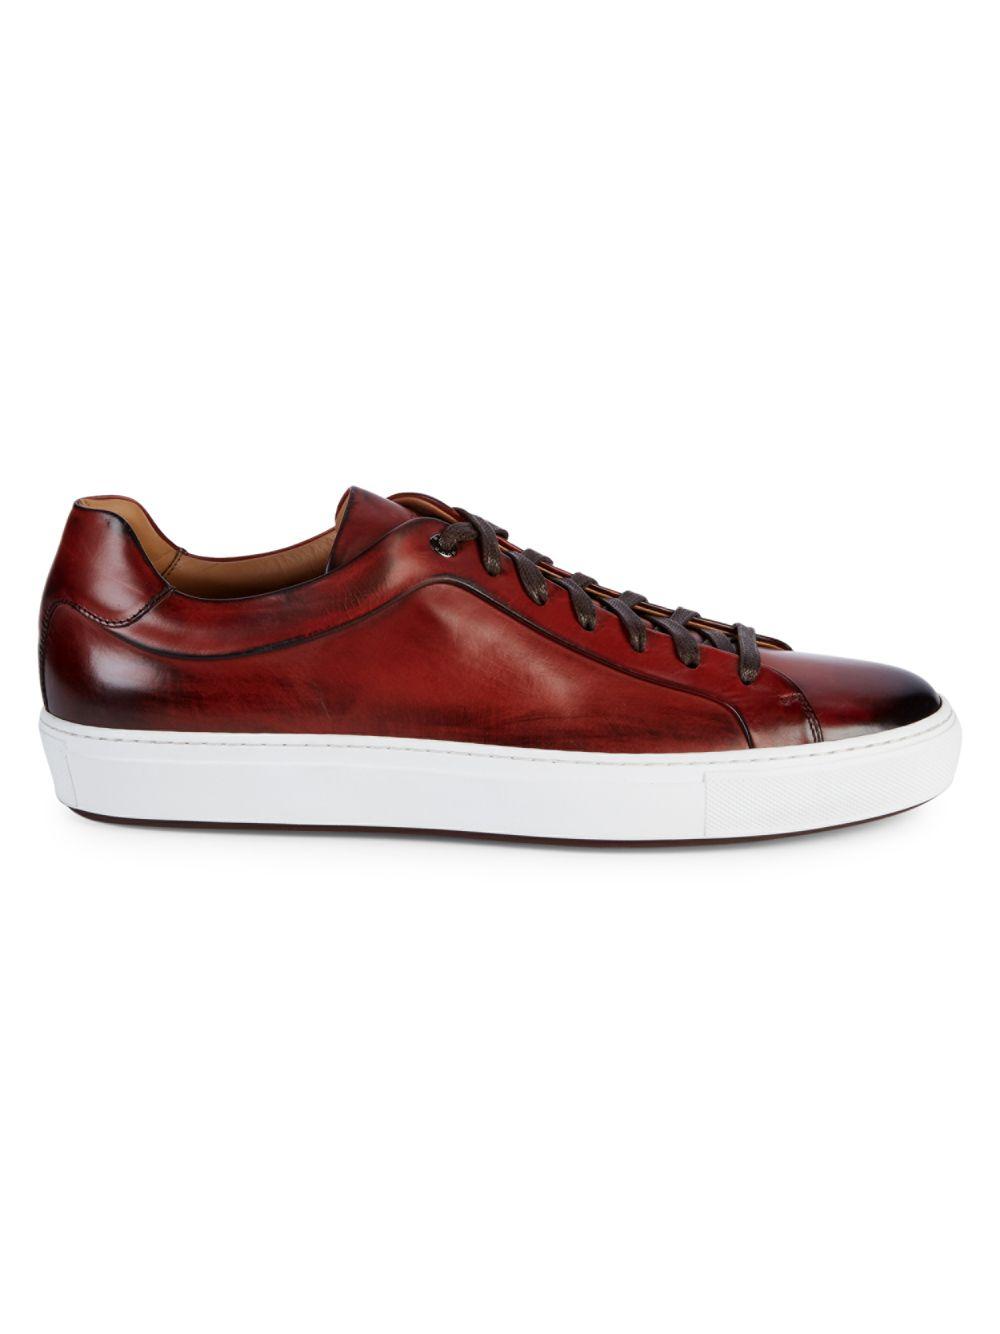 BOSS by HUGO BOSS Mirage Leather Tennis Shoes in Red for Men | Lyst